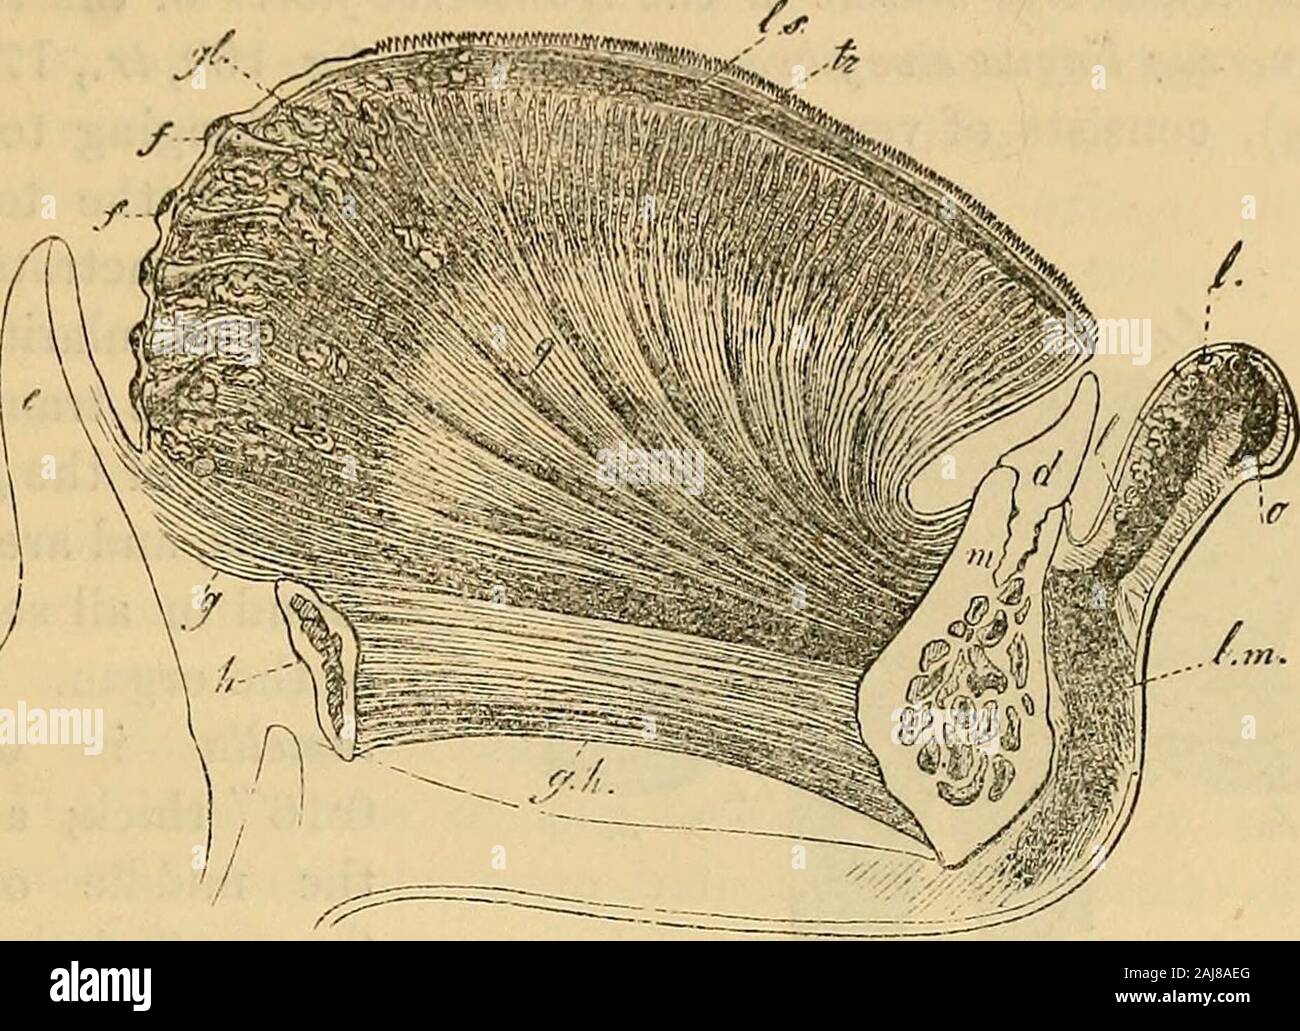 Manual of human histology . 169,g, 70,g, 171,/), so that they occupy the middle of the organfrom its point to its root, forming a long, moderately broad,fleshy mass, which, however, is anything but compact. Thegenio-glossi, in fact, when they have entered the tongue,exchange a few bundles here and there, along the lower edgeof the septum and then break up on each side into a greatnumber of lamella, which lie one behind the other, separatedby small interspaces, in which are the transverse muscular fibresof the tongue; the lamellae are, for the most part, perpendicular,but some curve forwards a Stock Photo